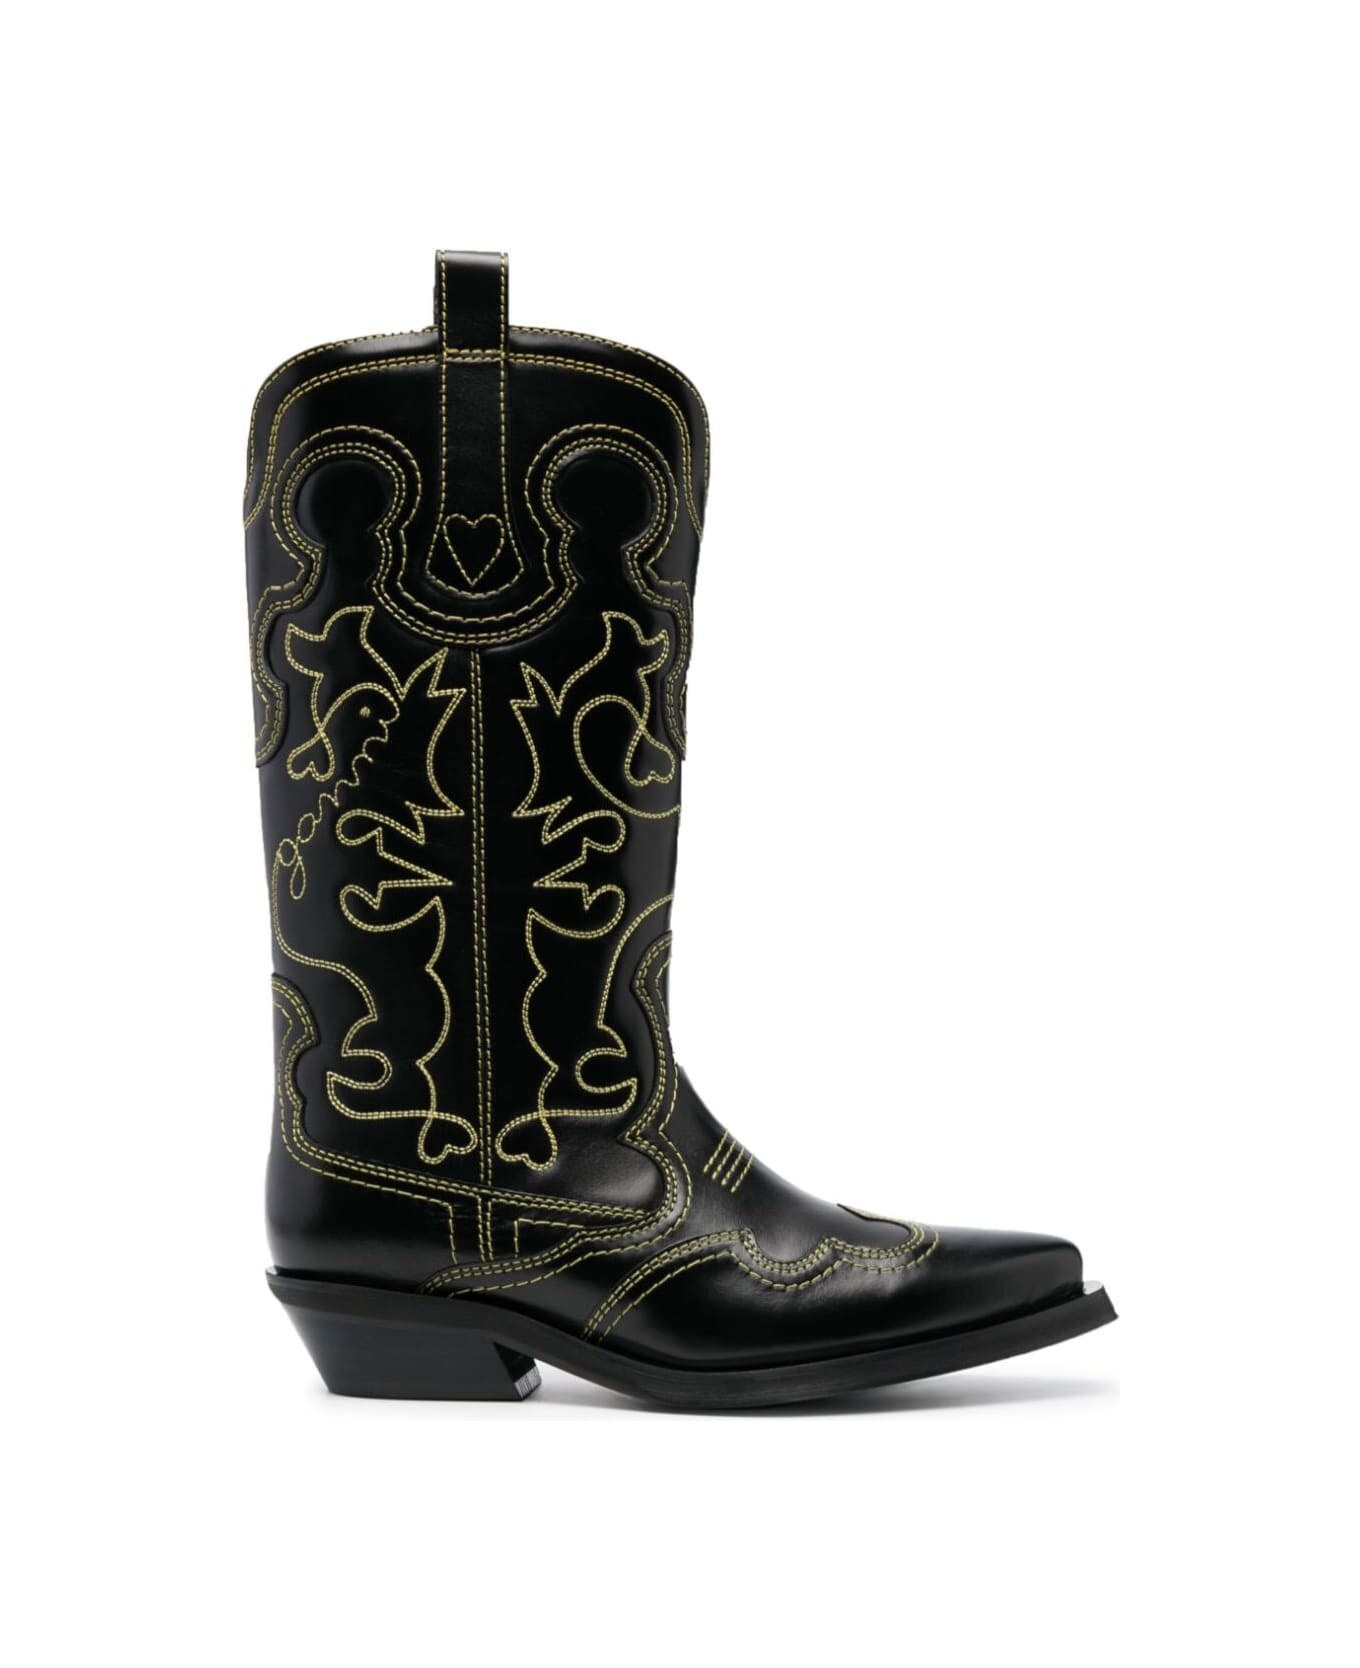 Ganni Black 'cowboy' Boots With Contrasting Embroidered Stitching In Leather Woman - Black ブーツ